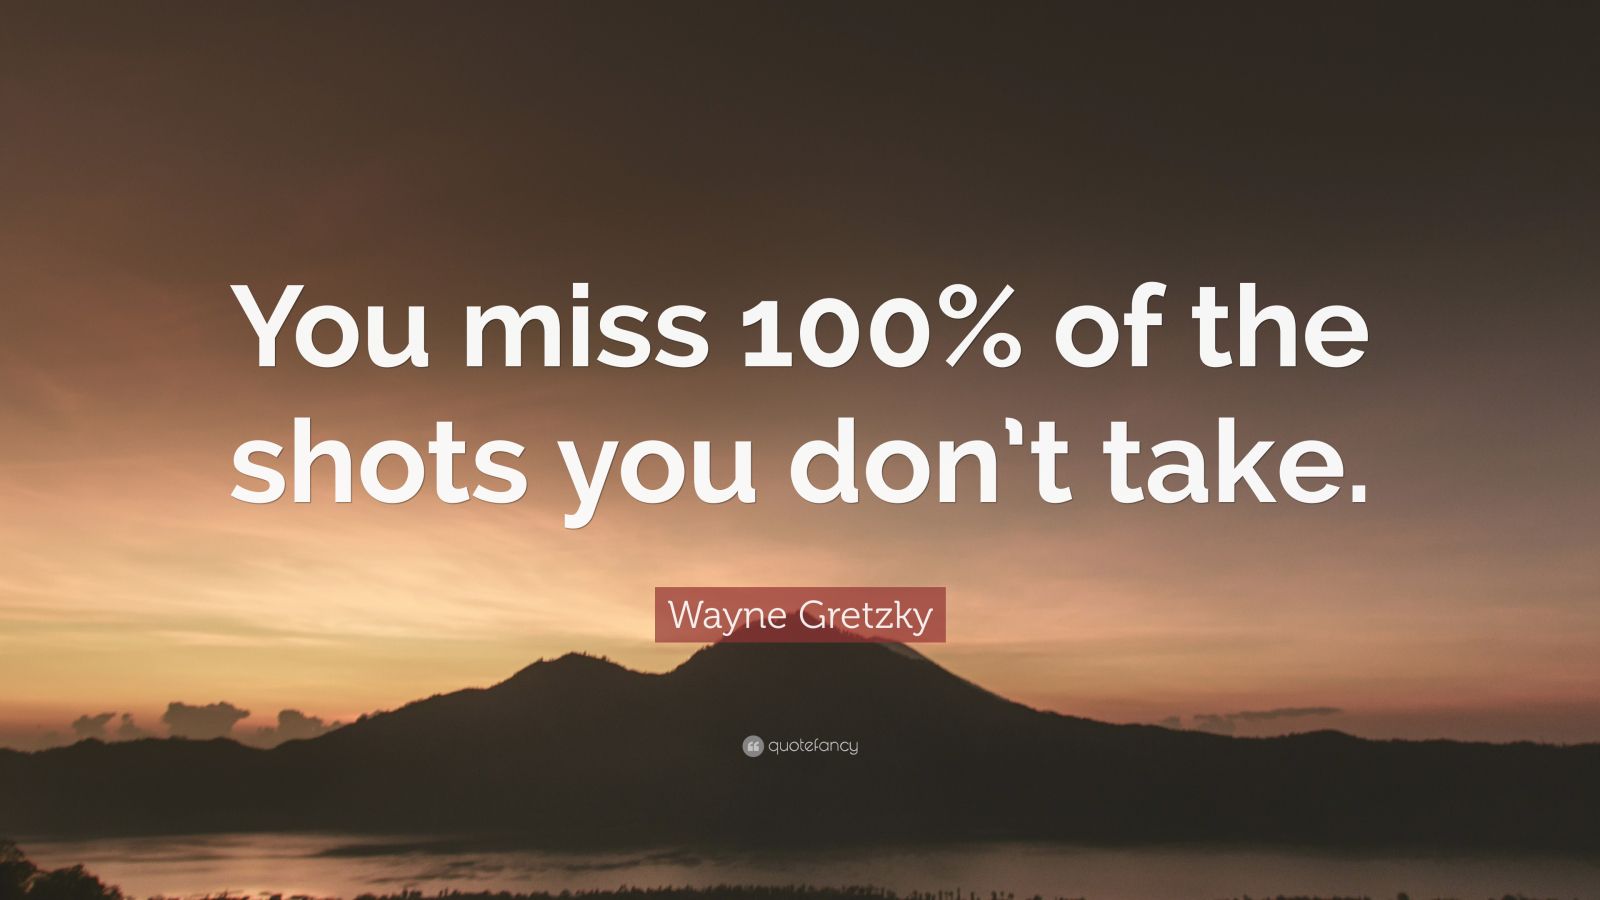 2002383 Wayne Gretzky Quote You miss 100 of the shots you don t take